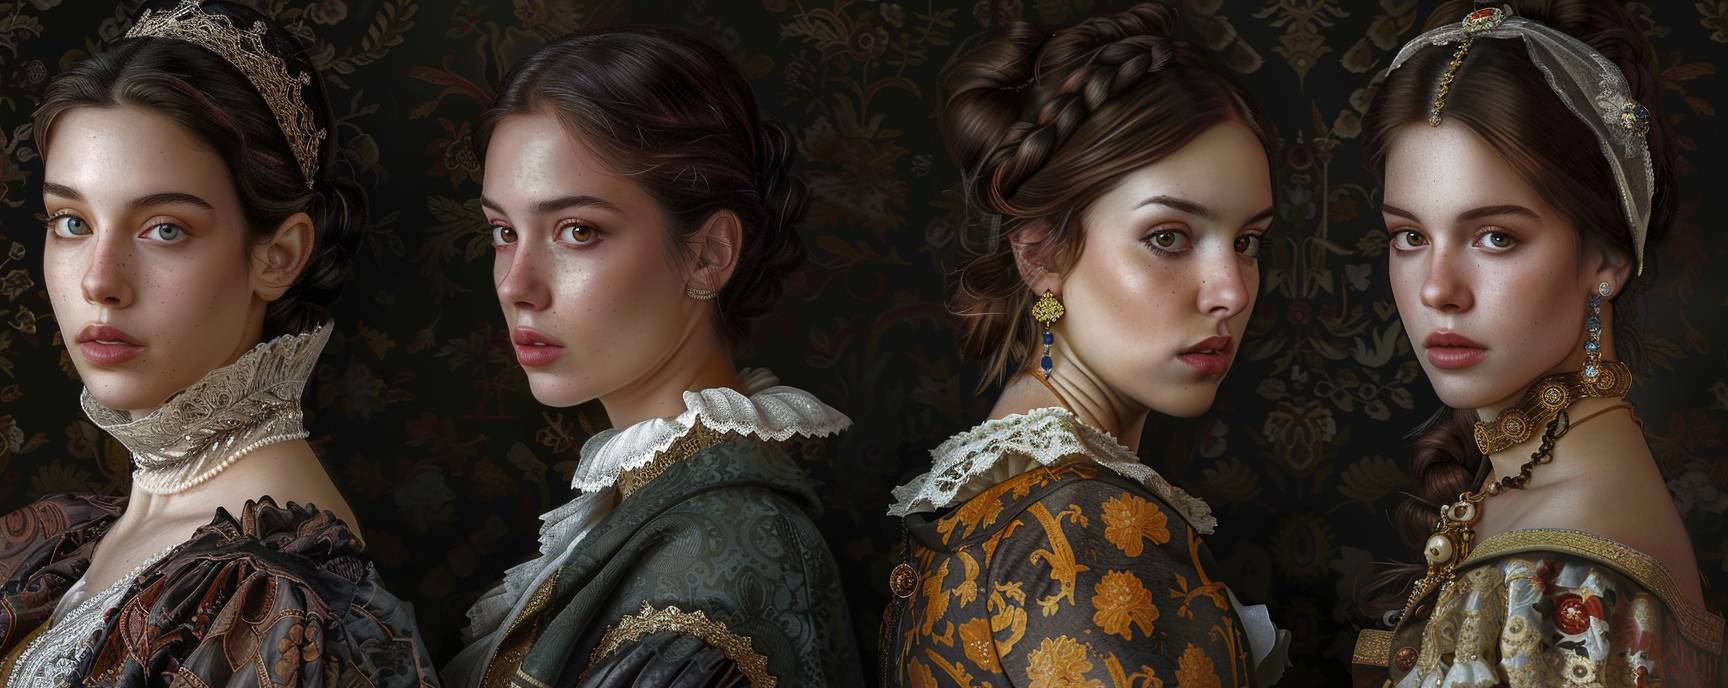 [Artist] painted in an elegant Renaissance outfit. [artist description]. The background of the painting contains dark hues in a classical oil portraiture style of renaissance art, cinematic lighting, hyper-realistic, elegance and grandeur typical for historical portraits --ar 5:2 --v 6.0